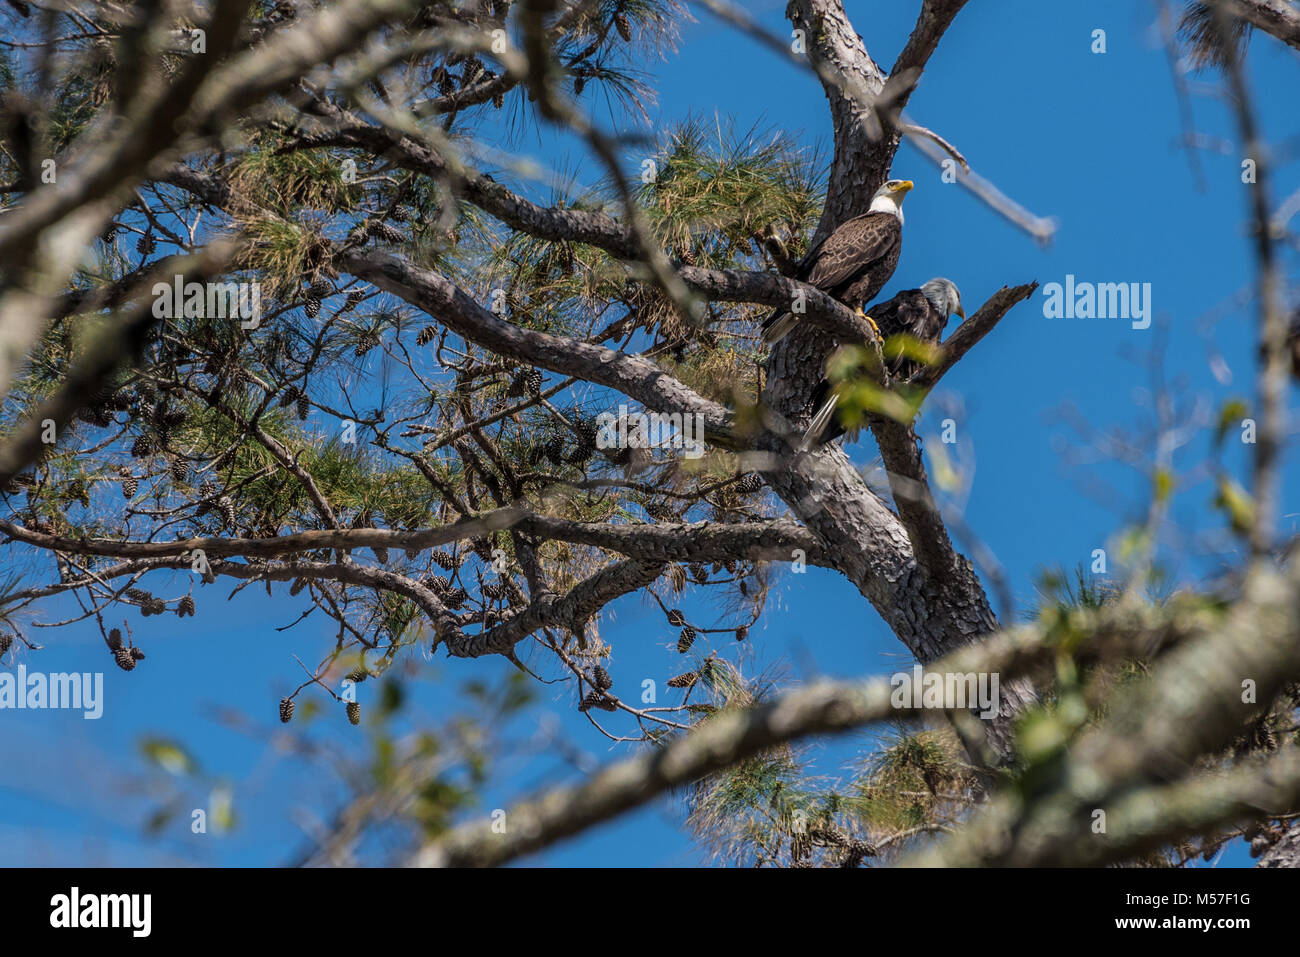 A pair of bald eagles (America's national bird) perched in a pine tree at Sawgrass Players Club in Ponte Vedra Beach, Florida near Jacksonville. (USA) Stock Photo